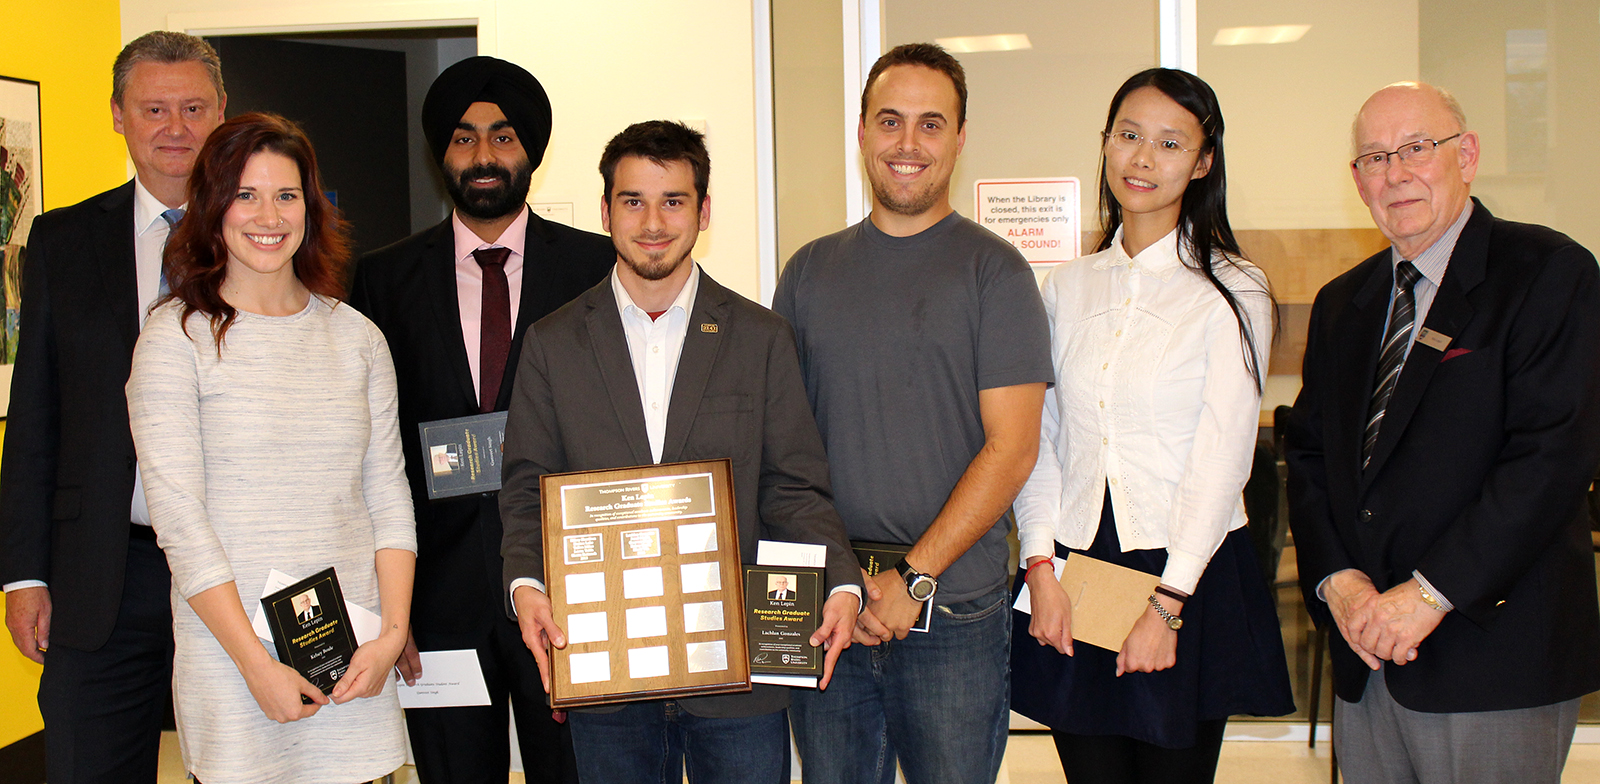 Dr. Will Garrett-Petts, AVP Research and Graduate Studies (left) and Ken Lepin (right), congratulate recipients of the 2016 Ken Lepin Graduate Student Awards, including (from second left) Kelsey Boule, Gunveet Singh, Lachlan Gonzales, Jared Maida and Ziwei Wu. 